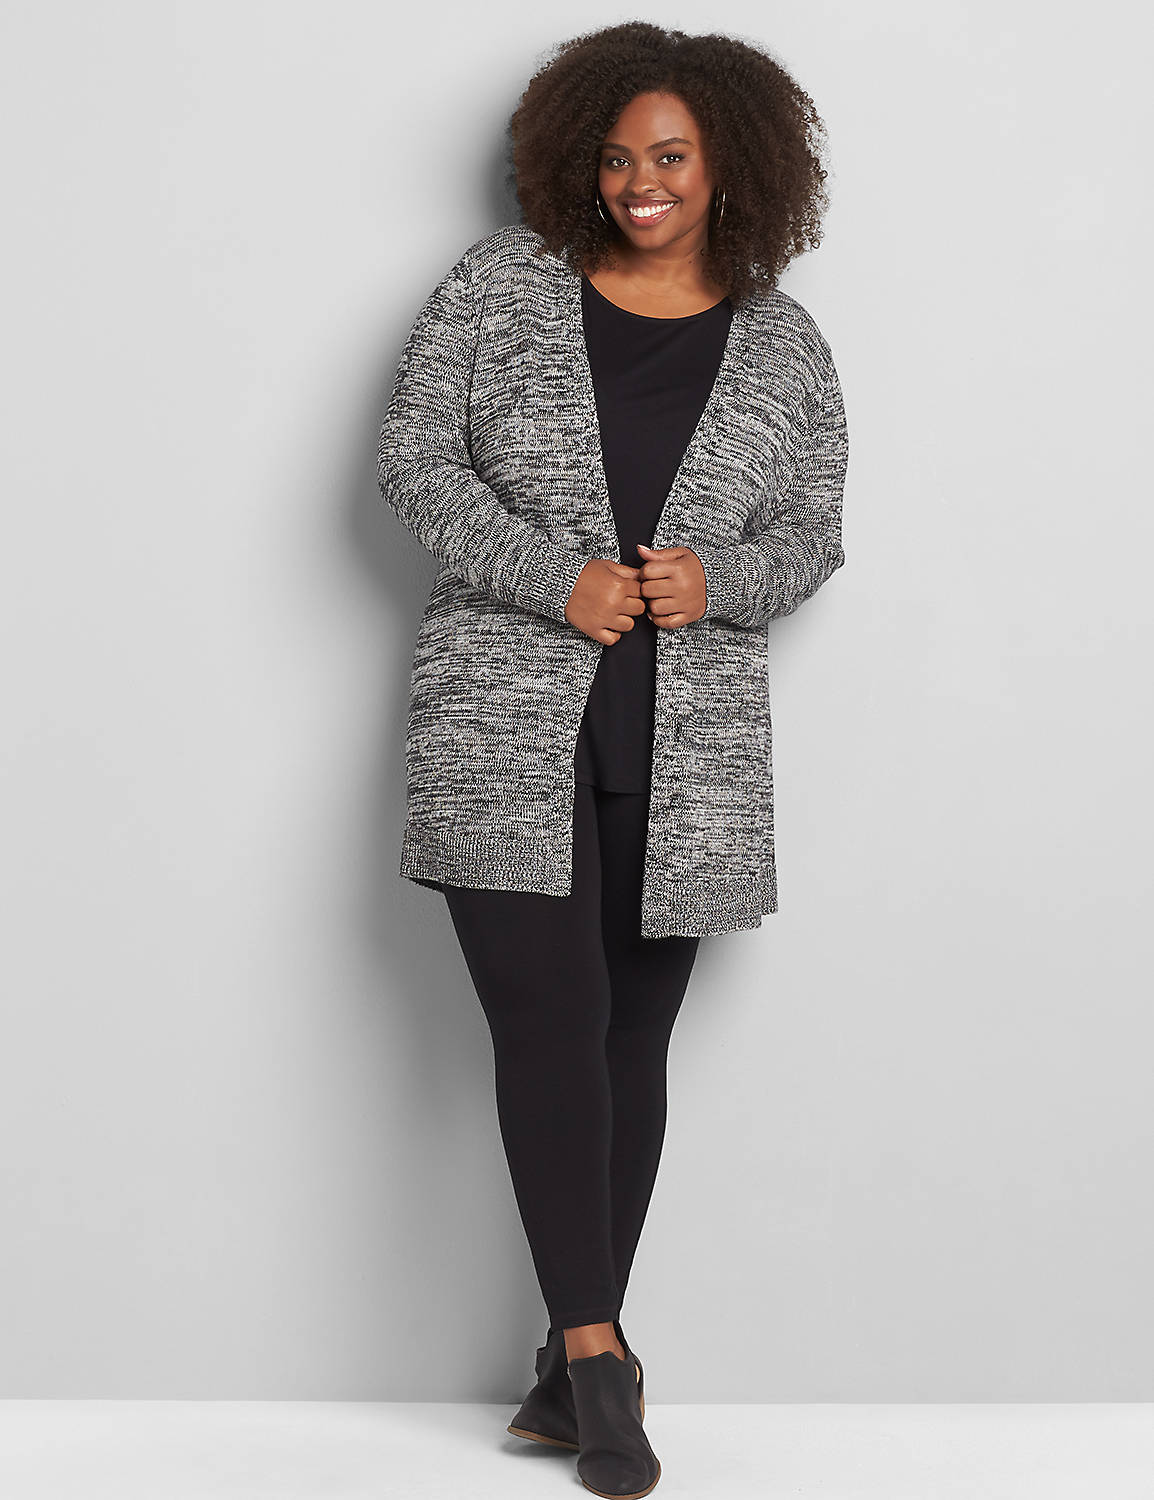 Long Sleeve Clean Front Cardigan with Marl 1118445:Ascena Black:26/28 Product Image 3